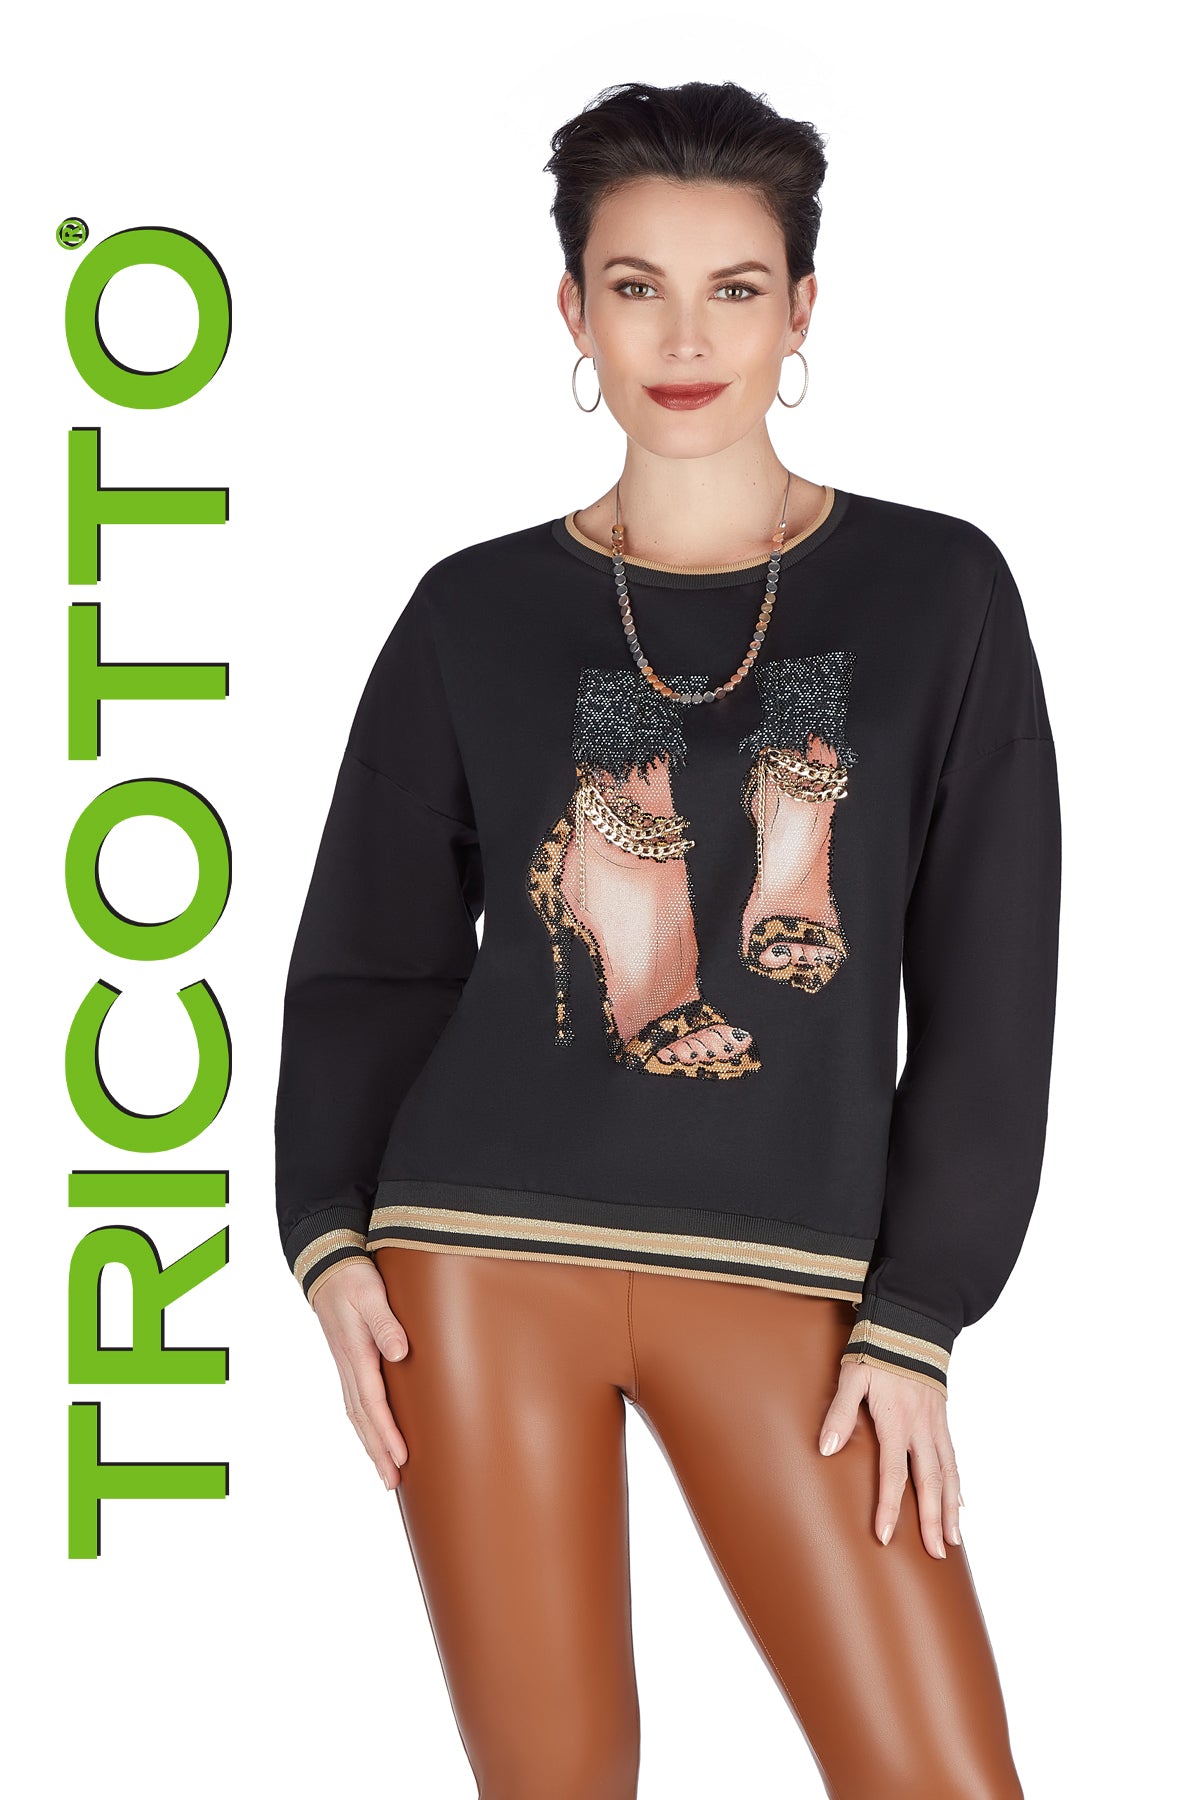 Tricotto Tops-Tricotto Online Shop-Buy Tricotto Clothing Online-Tricotto Online-Tricotto Fashion Montreal-Online Fashion Shop